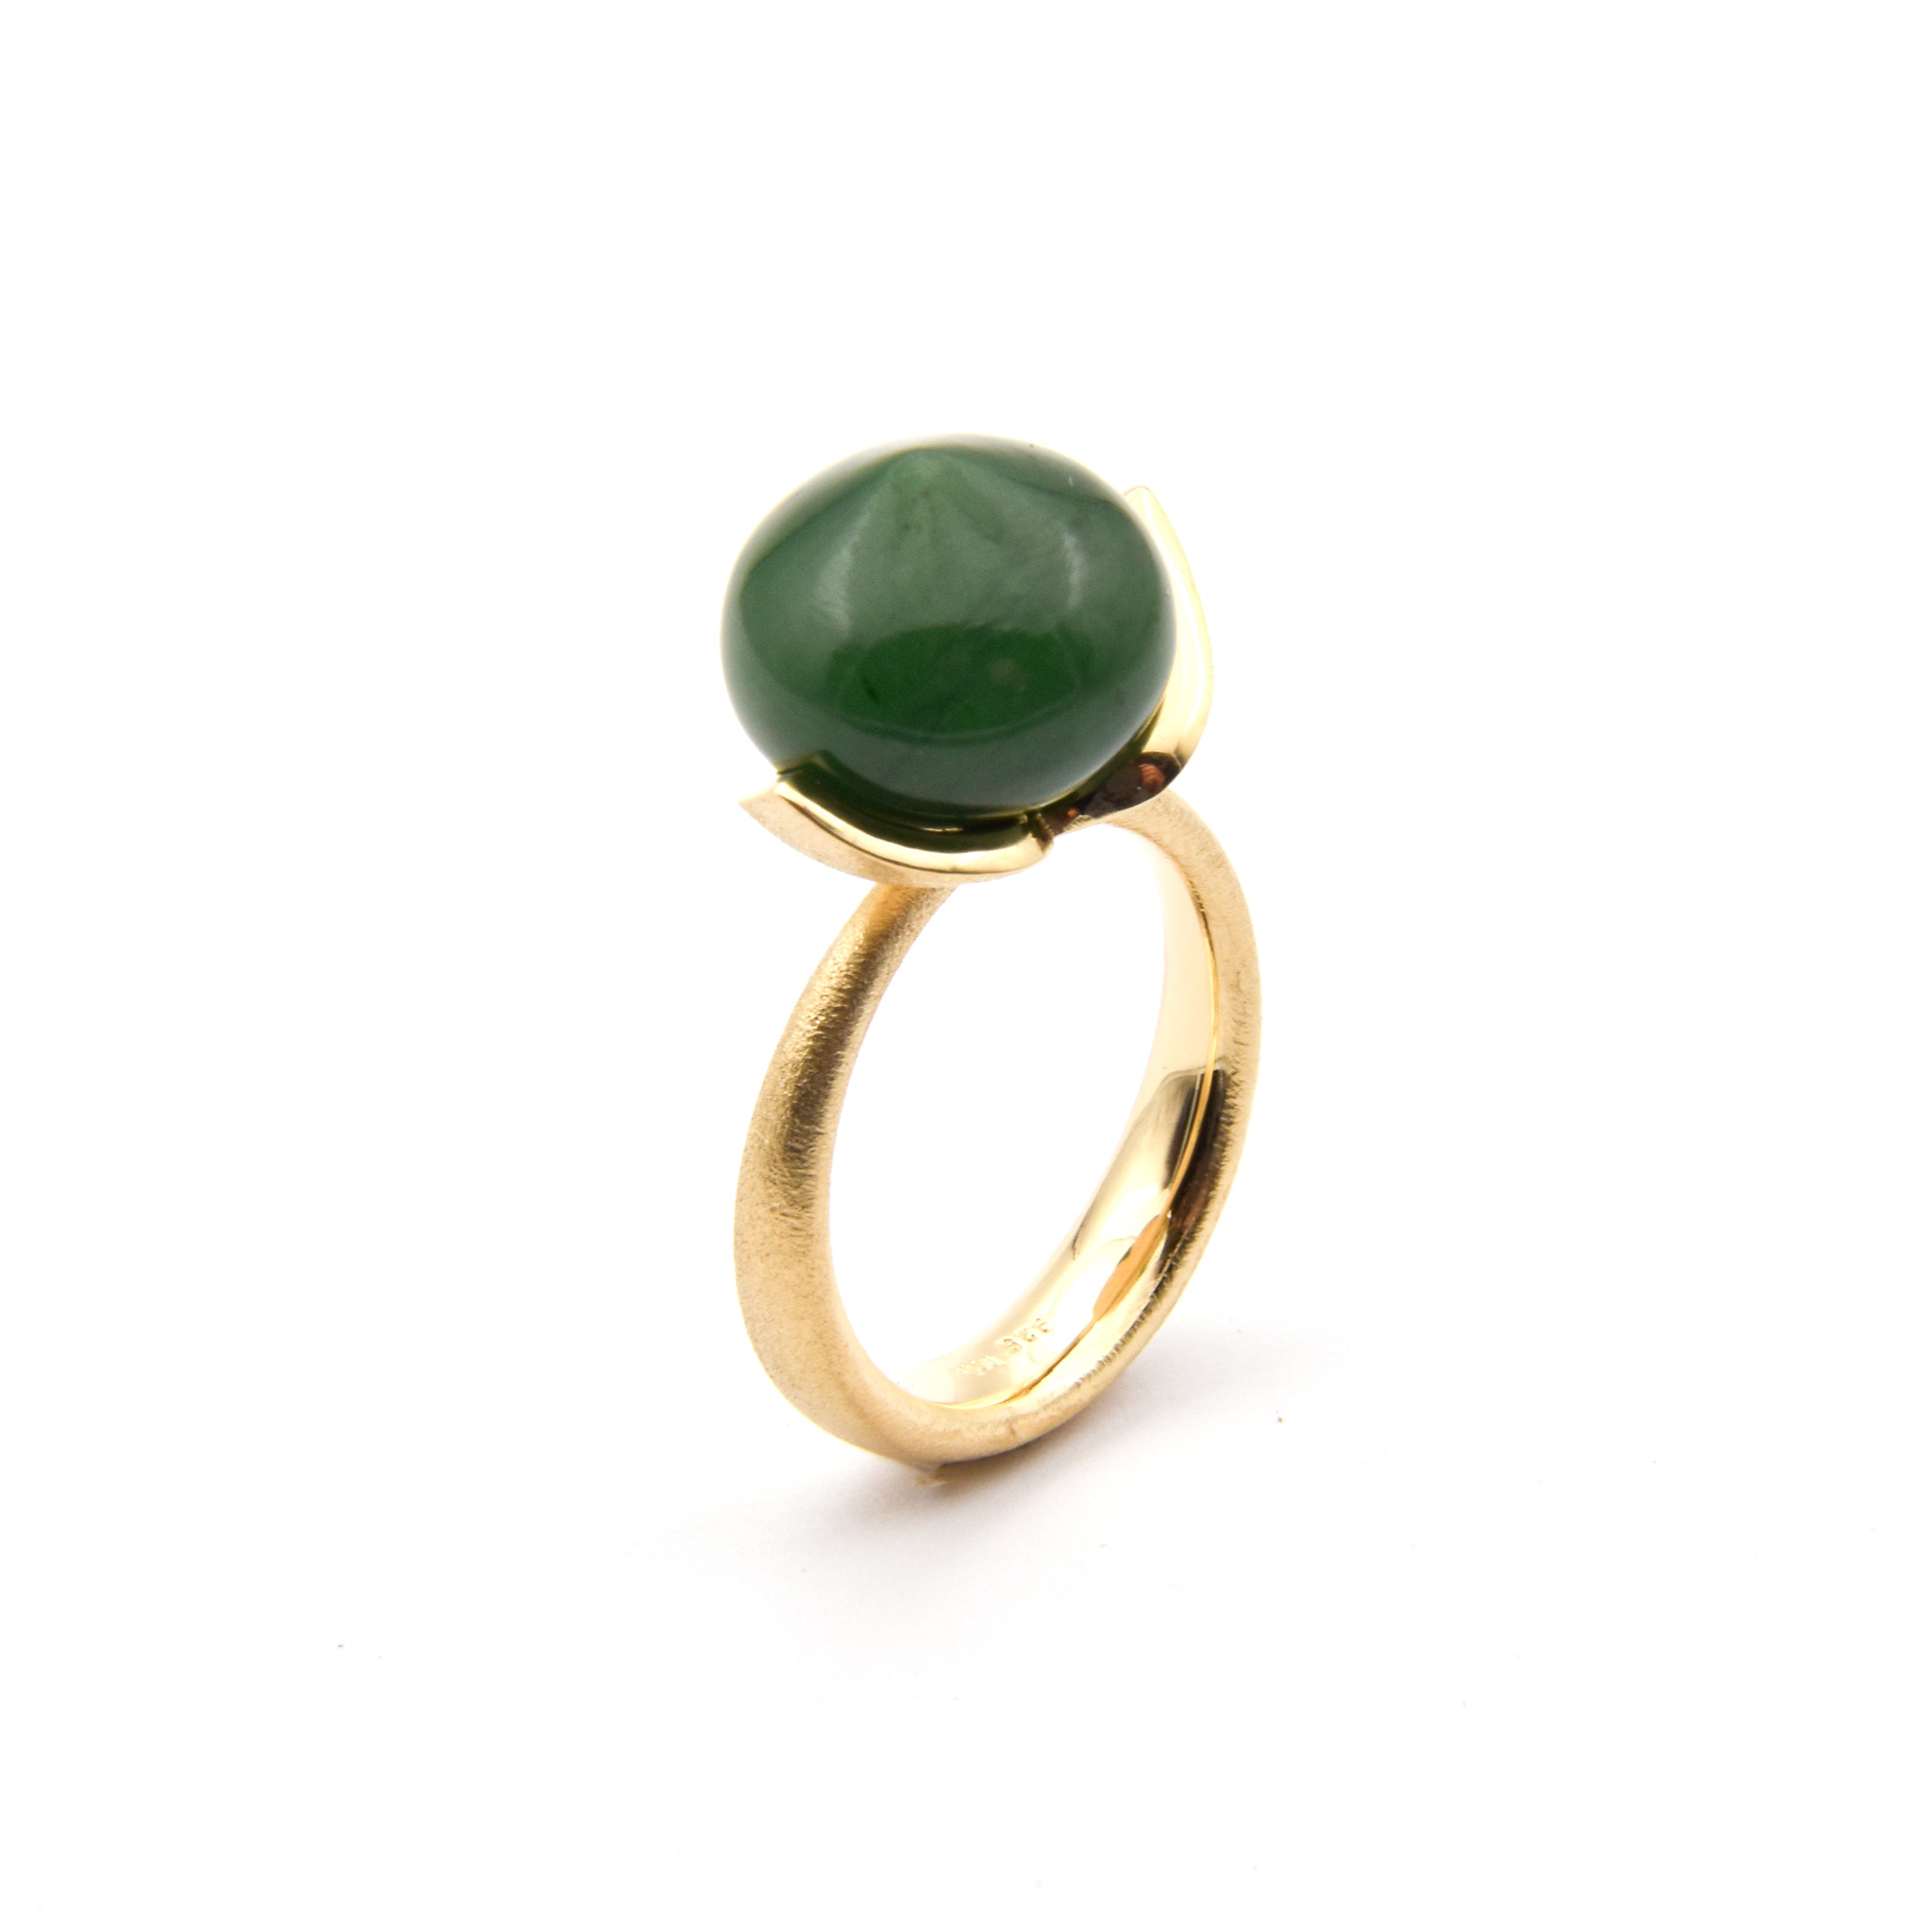 Dolce ring "big" with jade 925/-